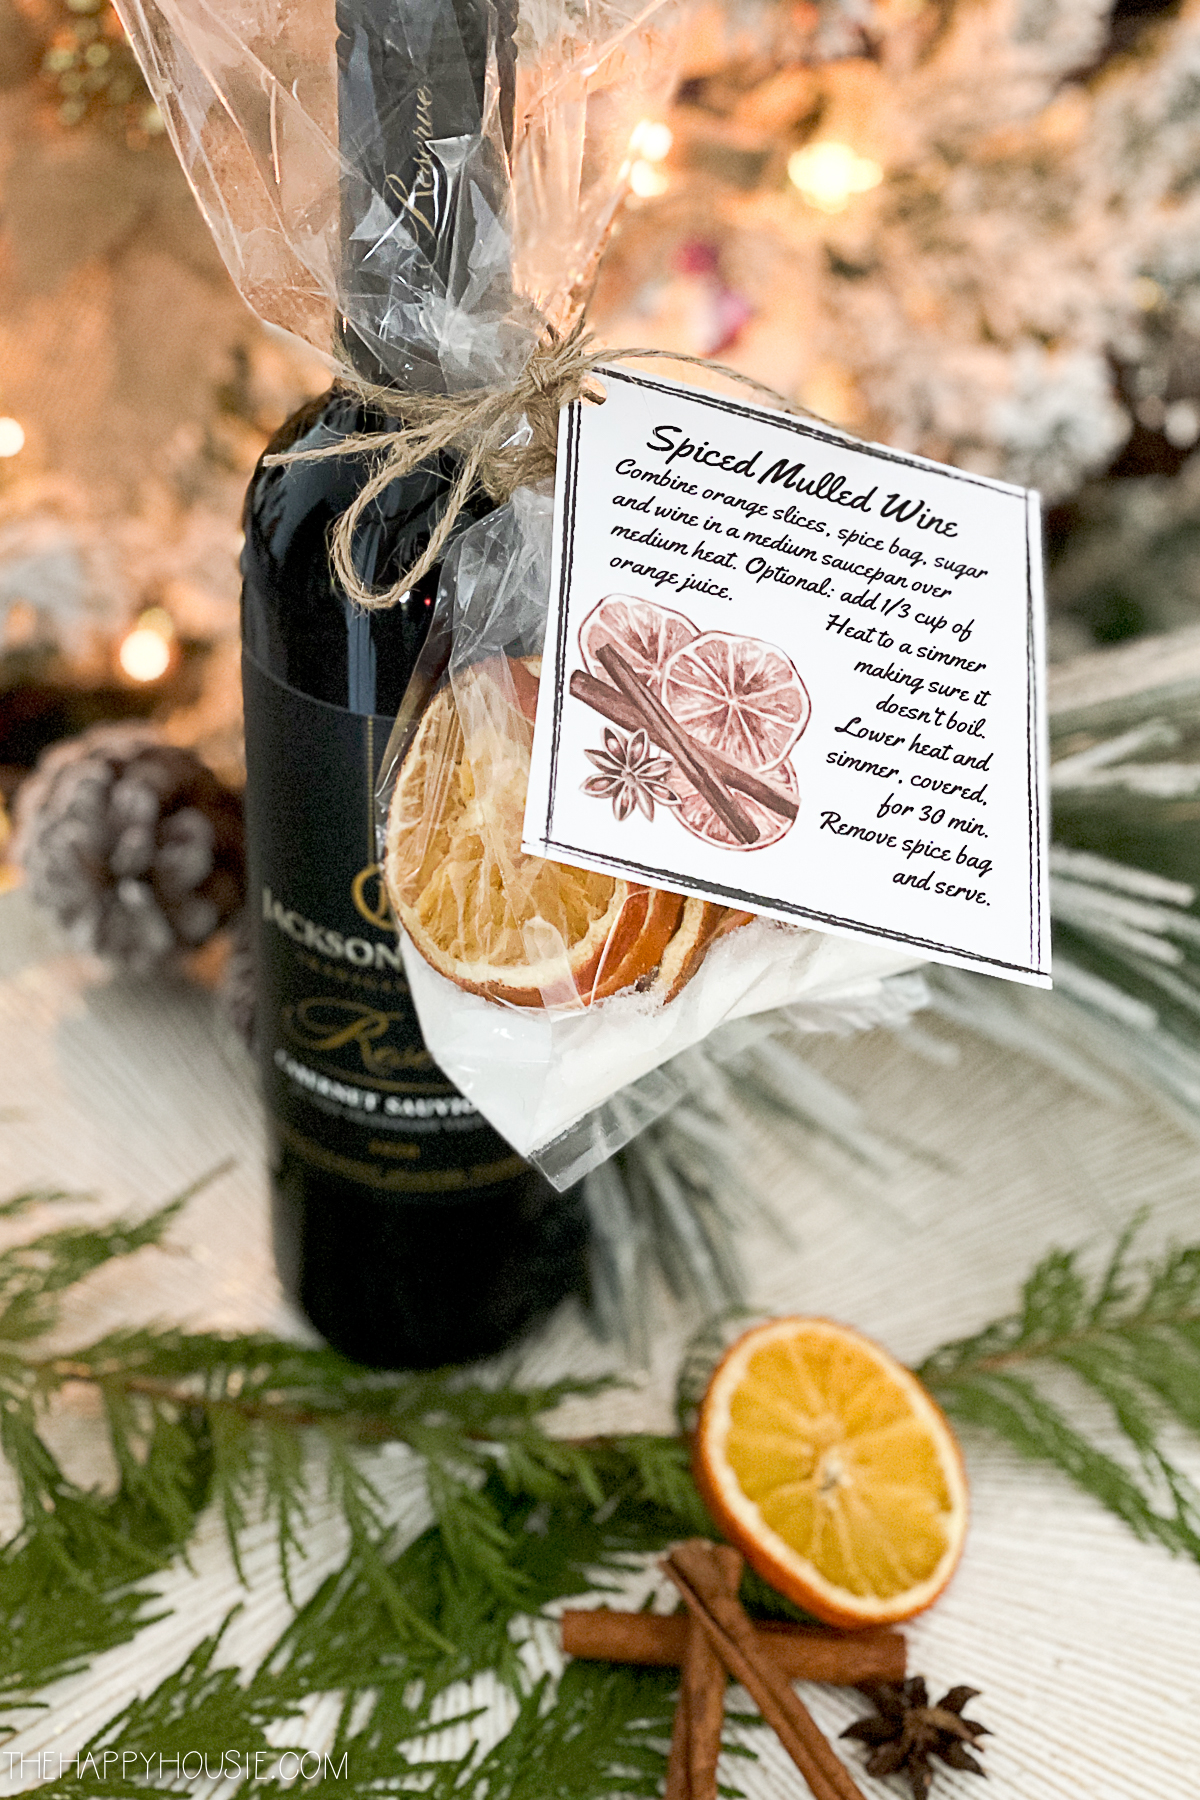 https://www.thehappyhousie.com/wp-content/uploads/2021/12/Spiced-Mulled-Wine-Gift-Idea-1.jpg